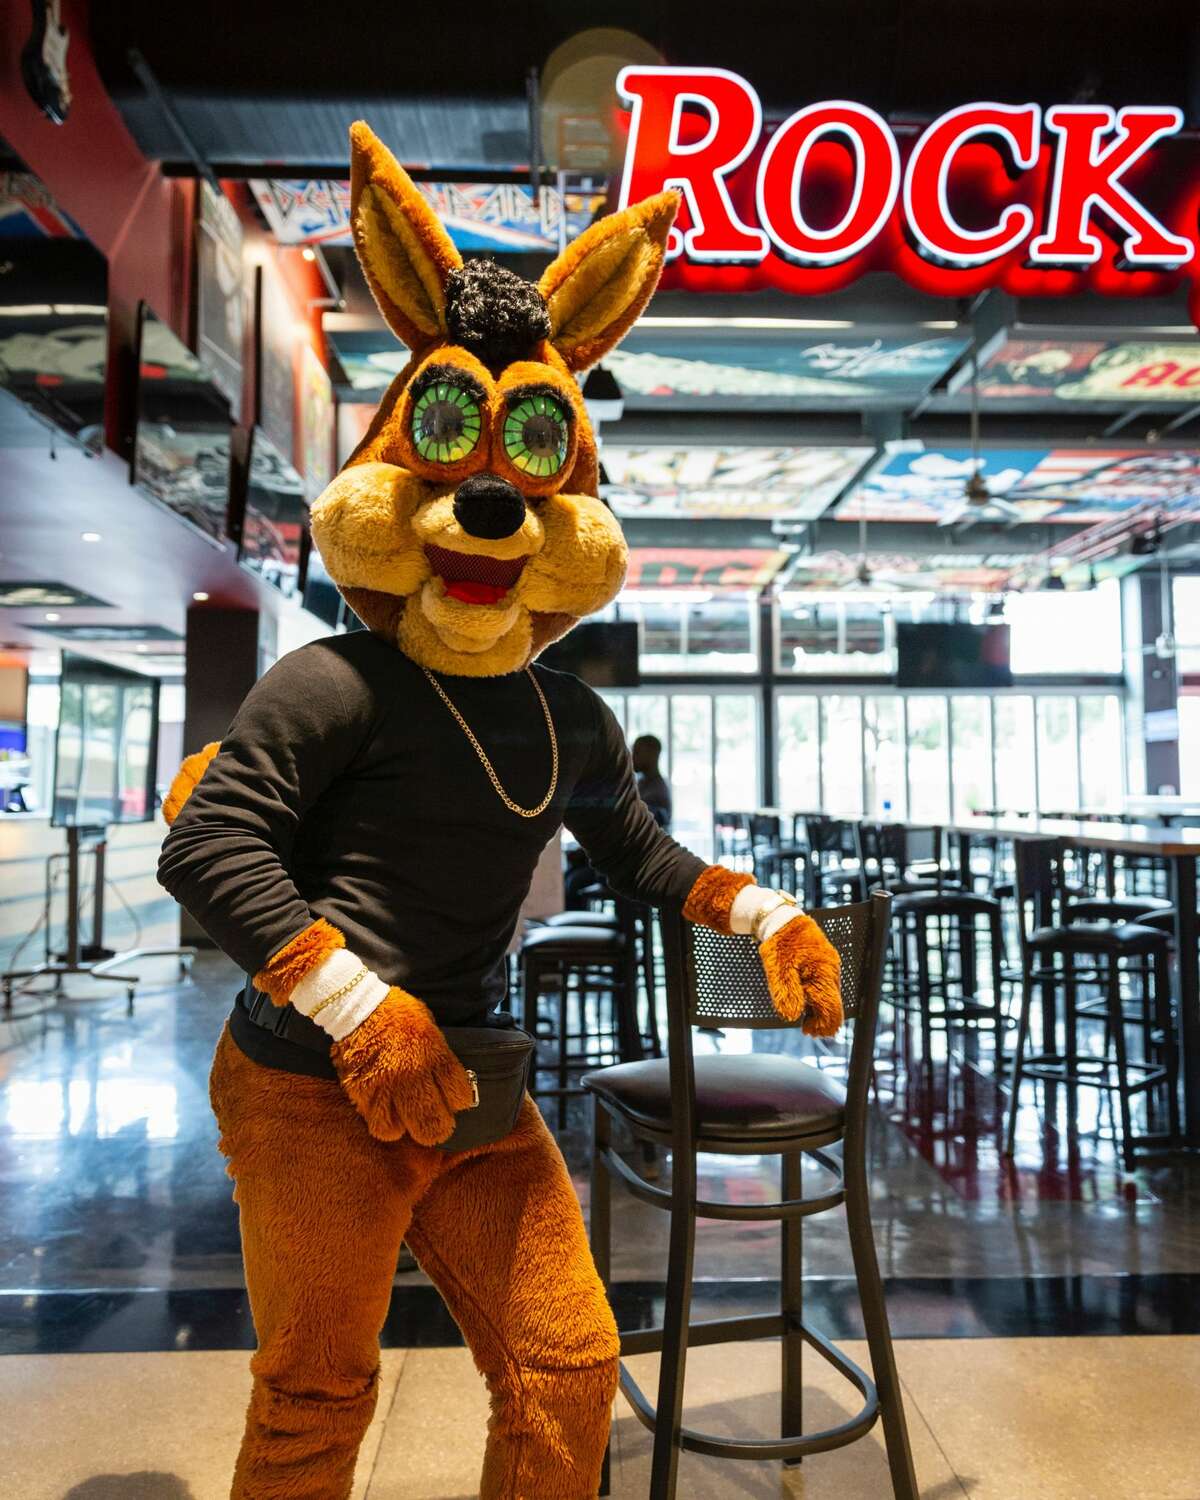 The Coyote paying homage to The Rock. 